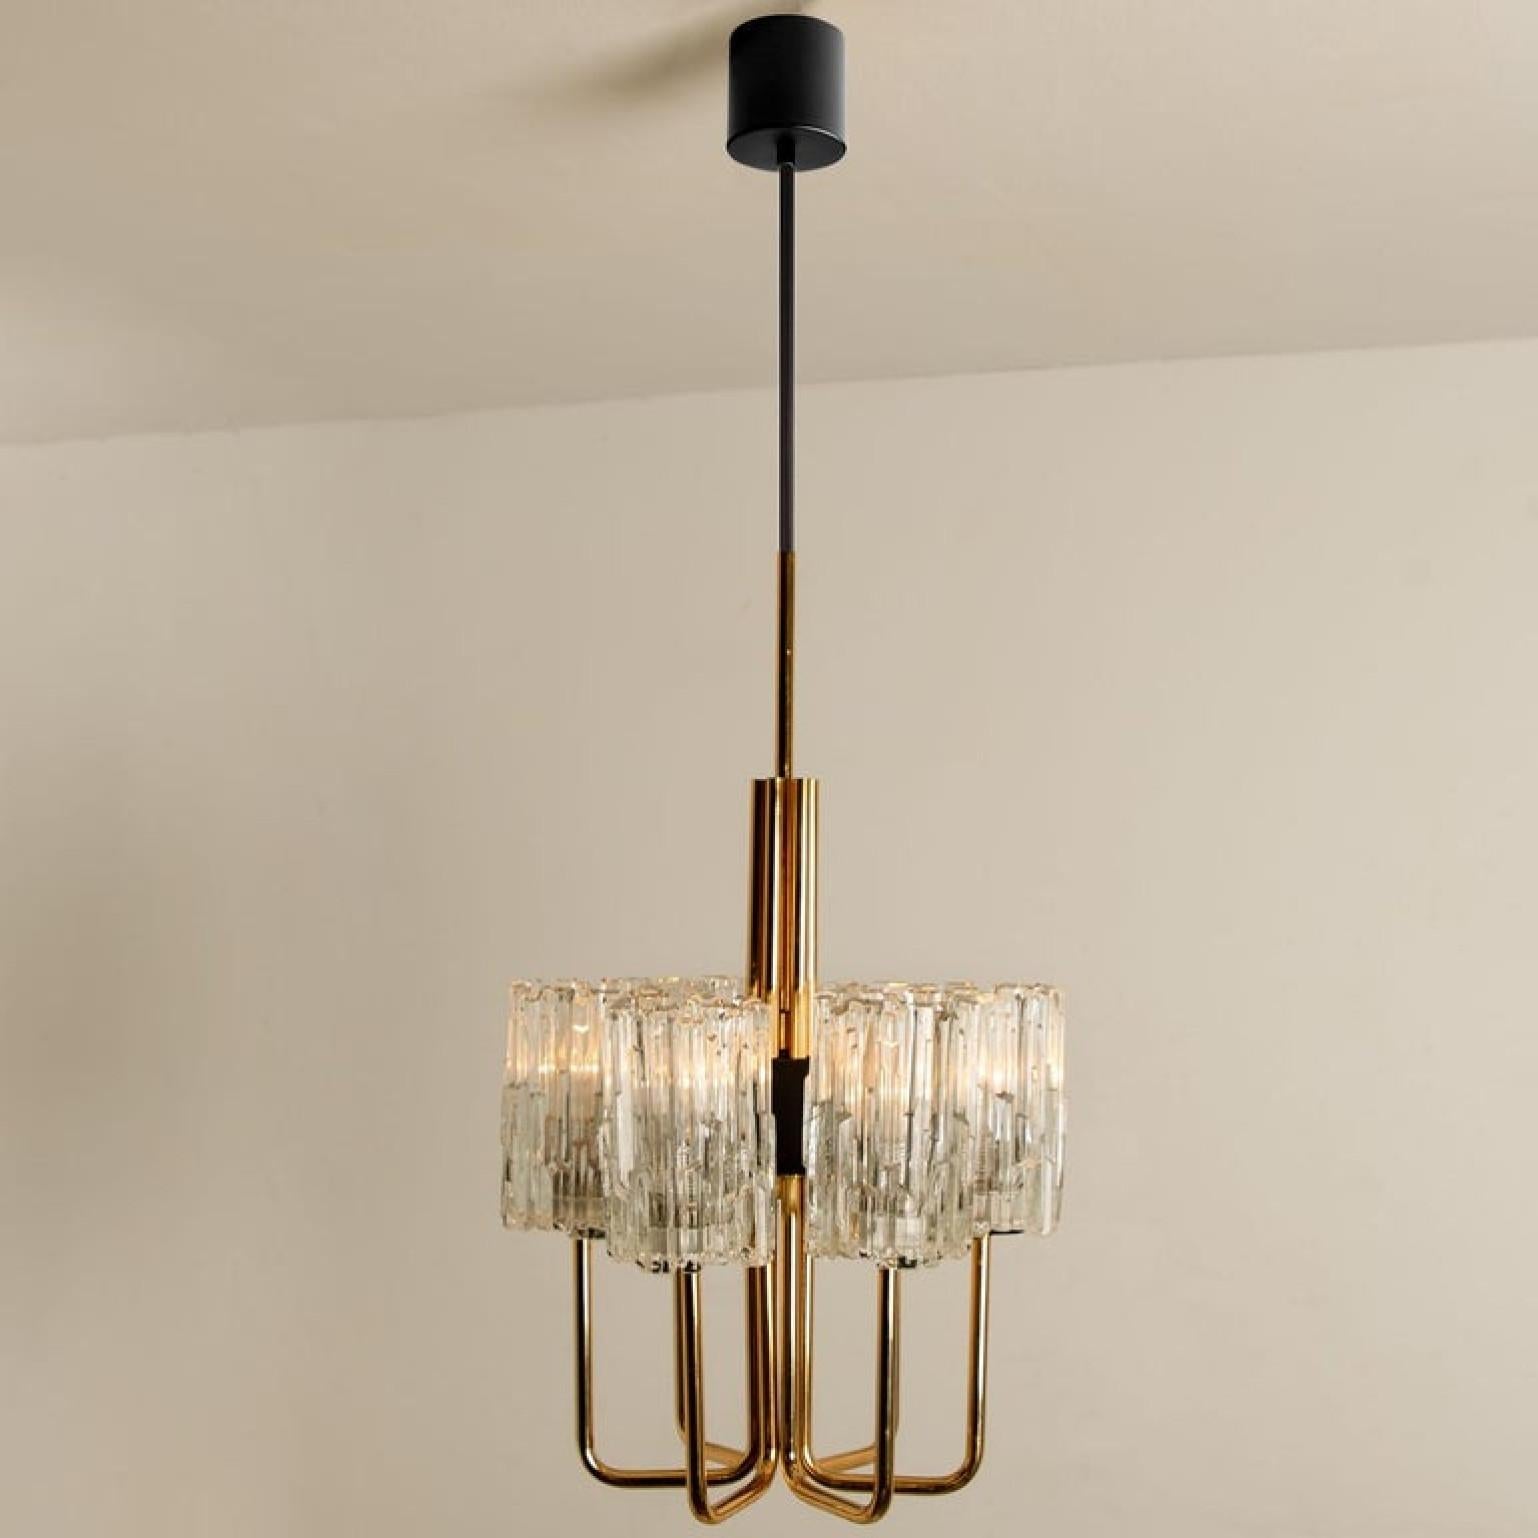 Midcentury Brass and Blown Glass Chandelier by Hillebrand, 1960s For Sale 2